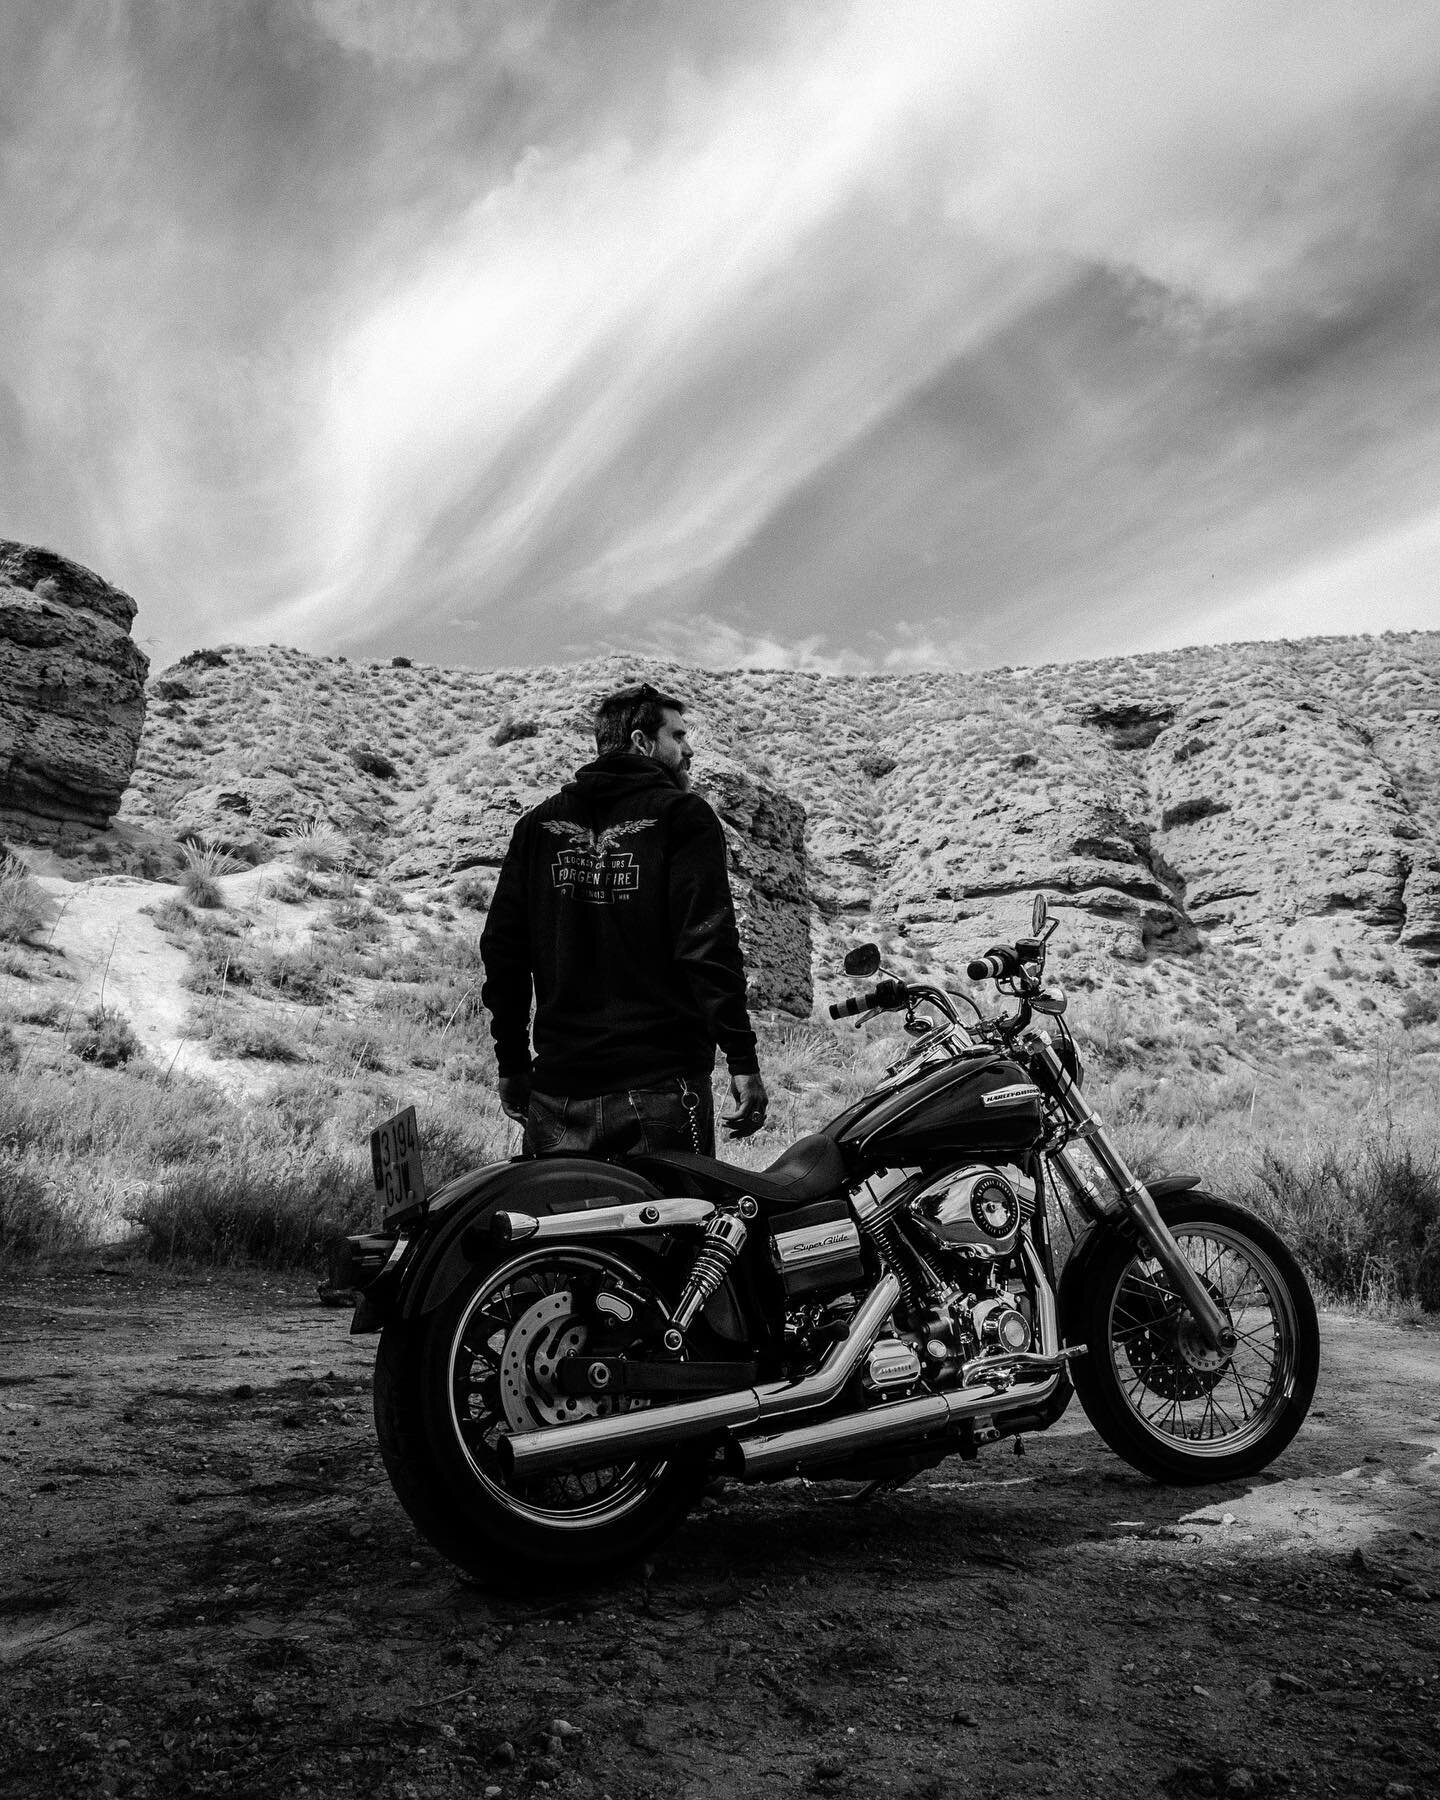 Time to get lost in the desert 👉🏻🏜🫠 @clocksandcolours thank you for providing me with inspiration. 

#clocksandcolours #harleydavidson #desert #trip #blackandwhite #dyna #superglide #joshua #joshuatree #ride #roadtrip #ontheroad #harley #harleyda